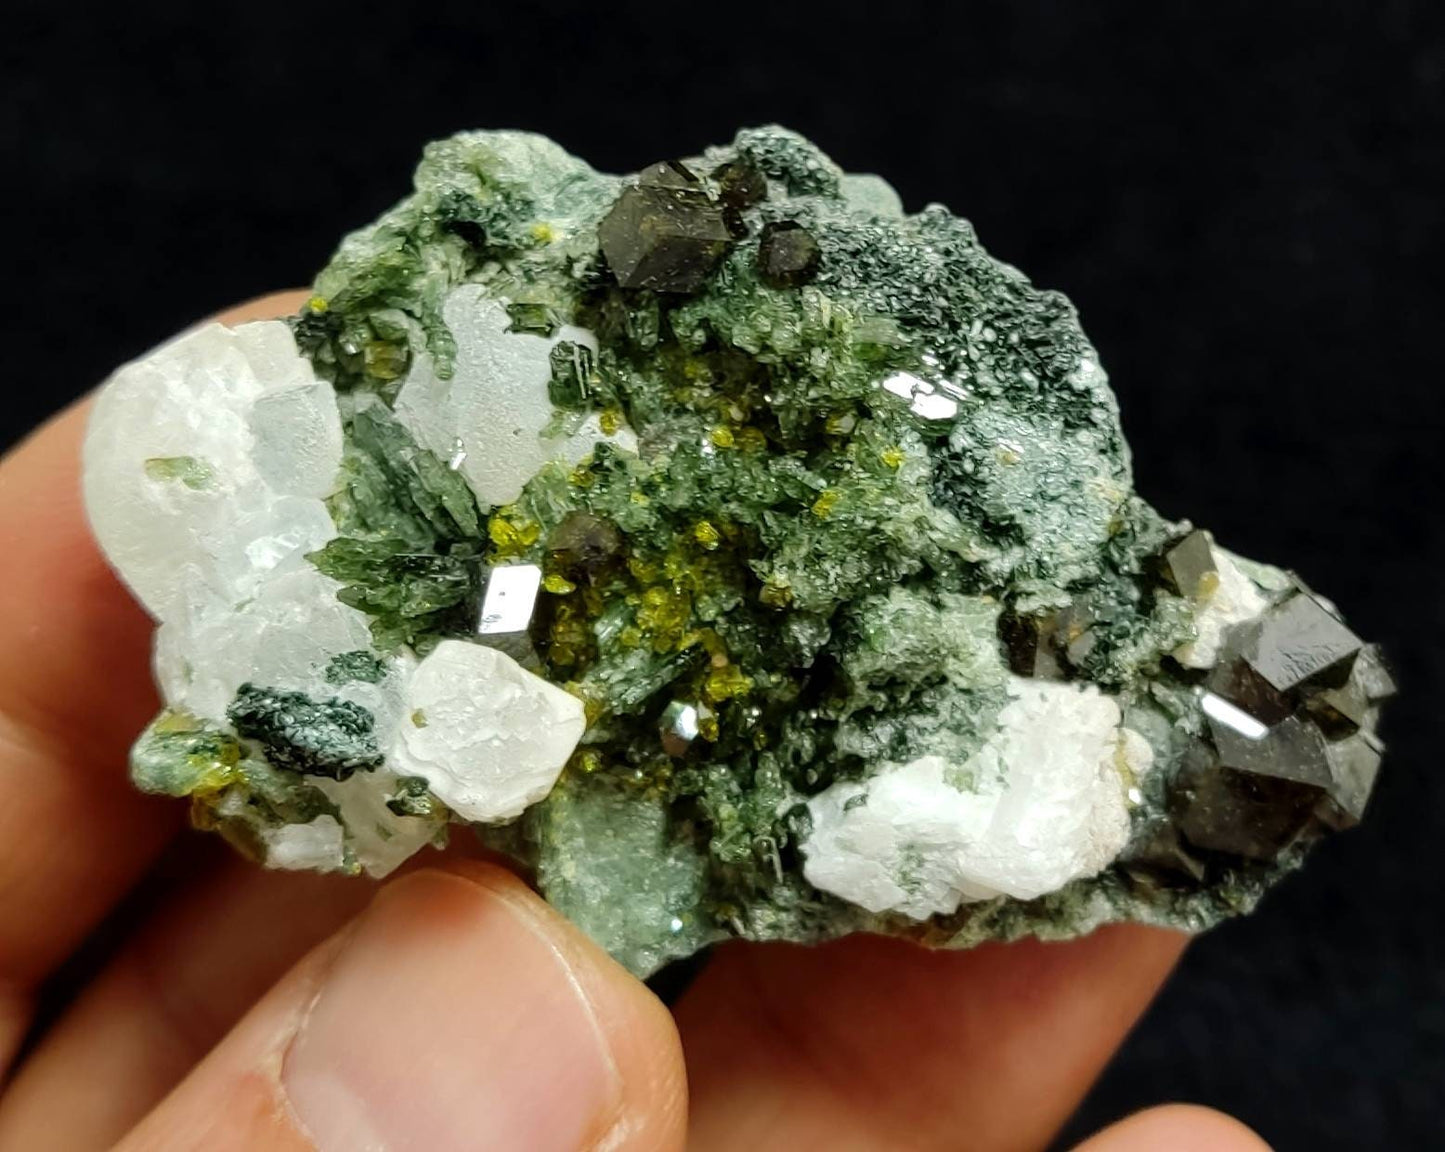 Andradite garnet crystals on matrix with epidote, diopside and calcite aesthetic specimen 51 grams